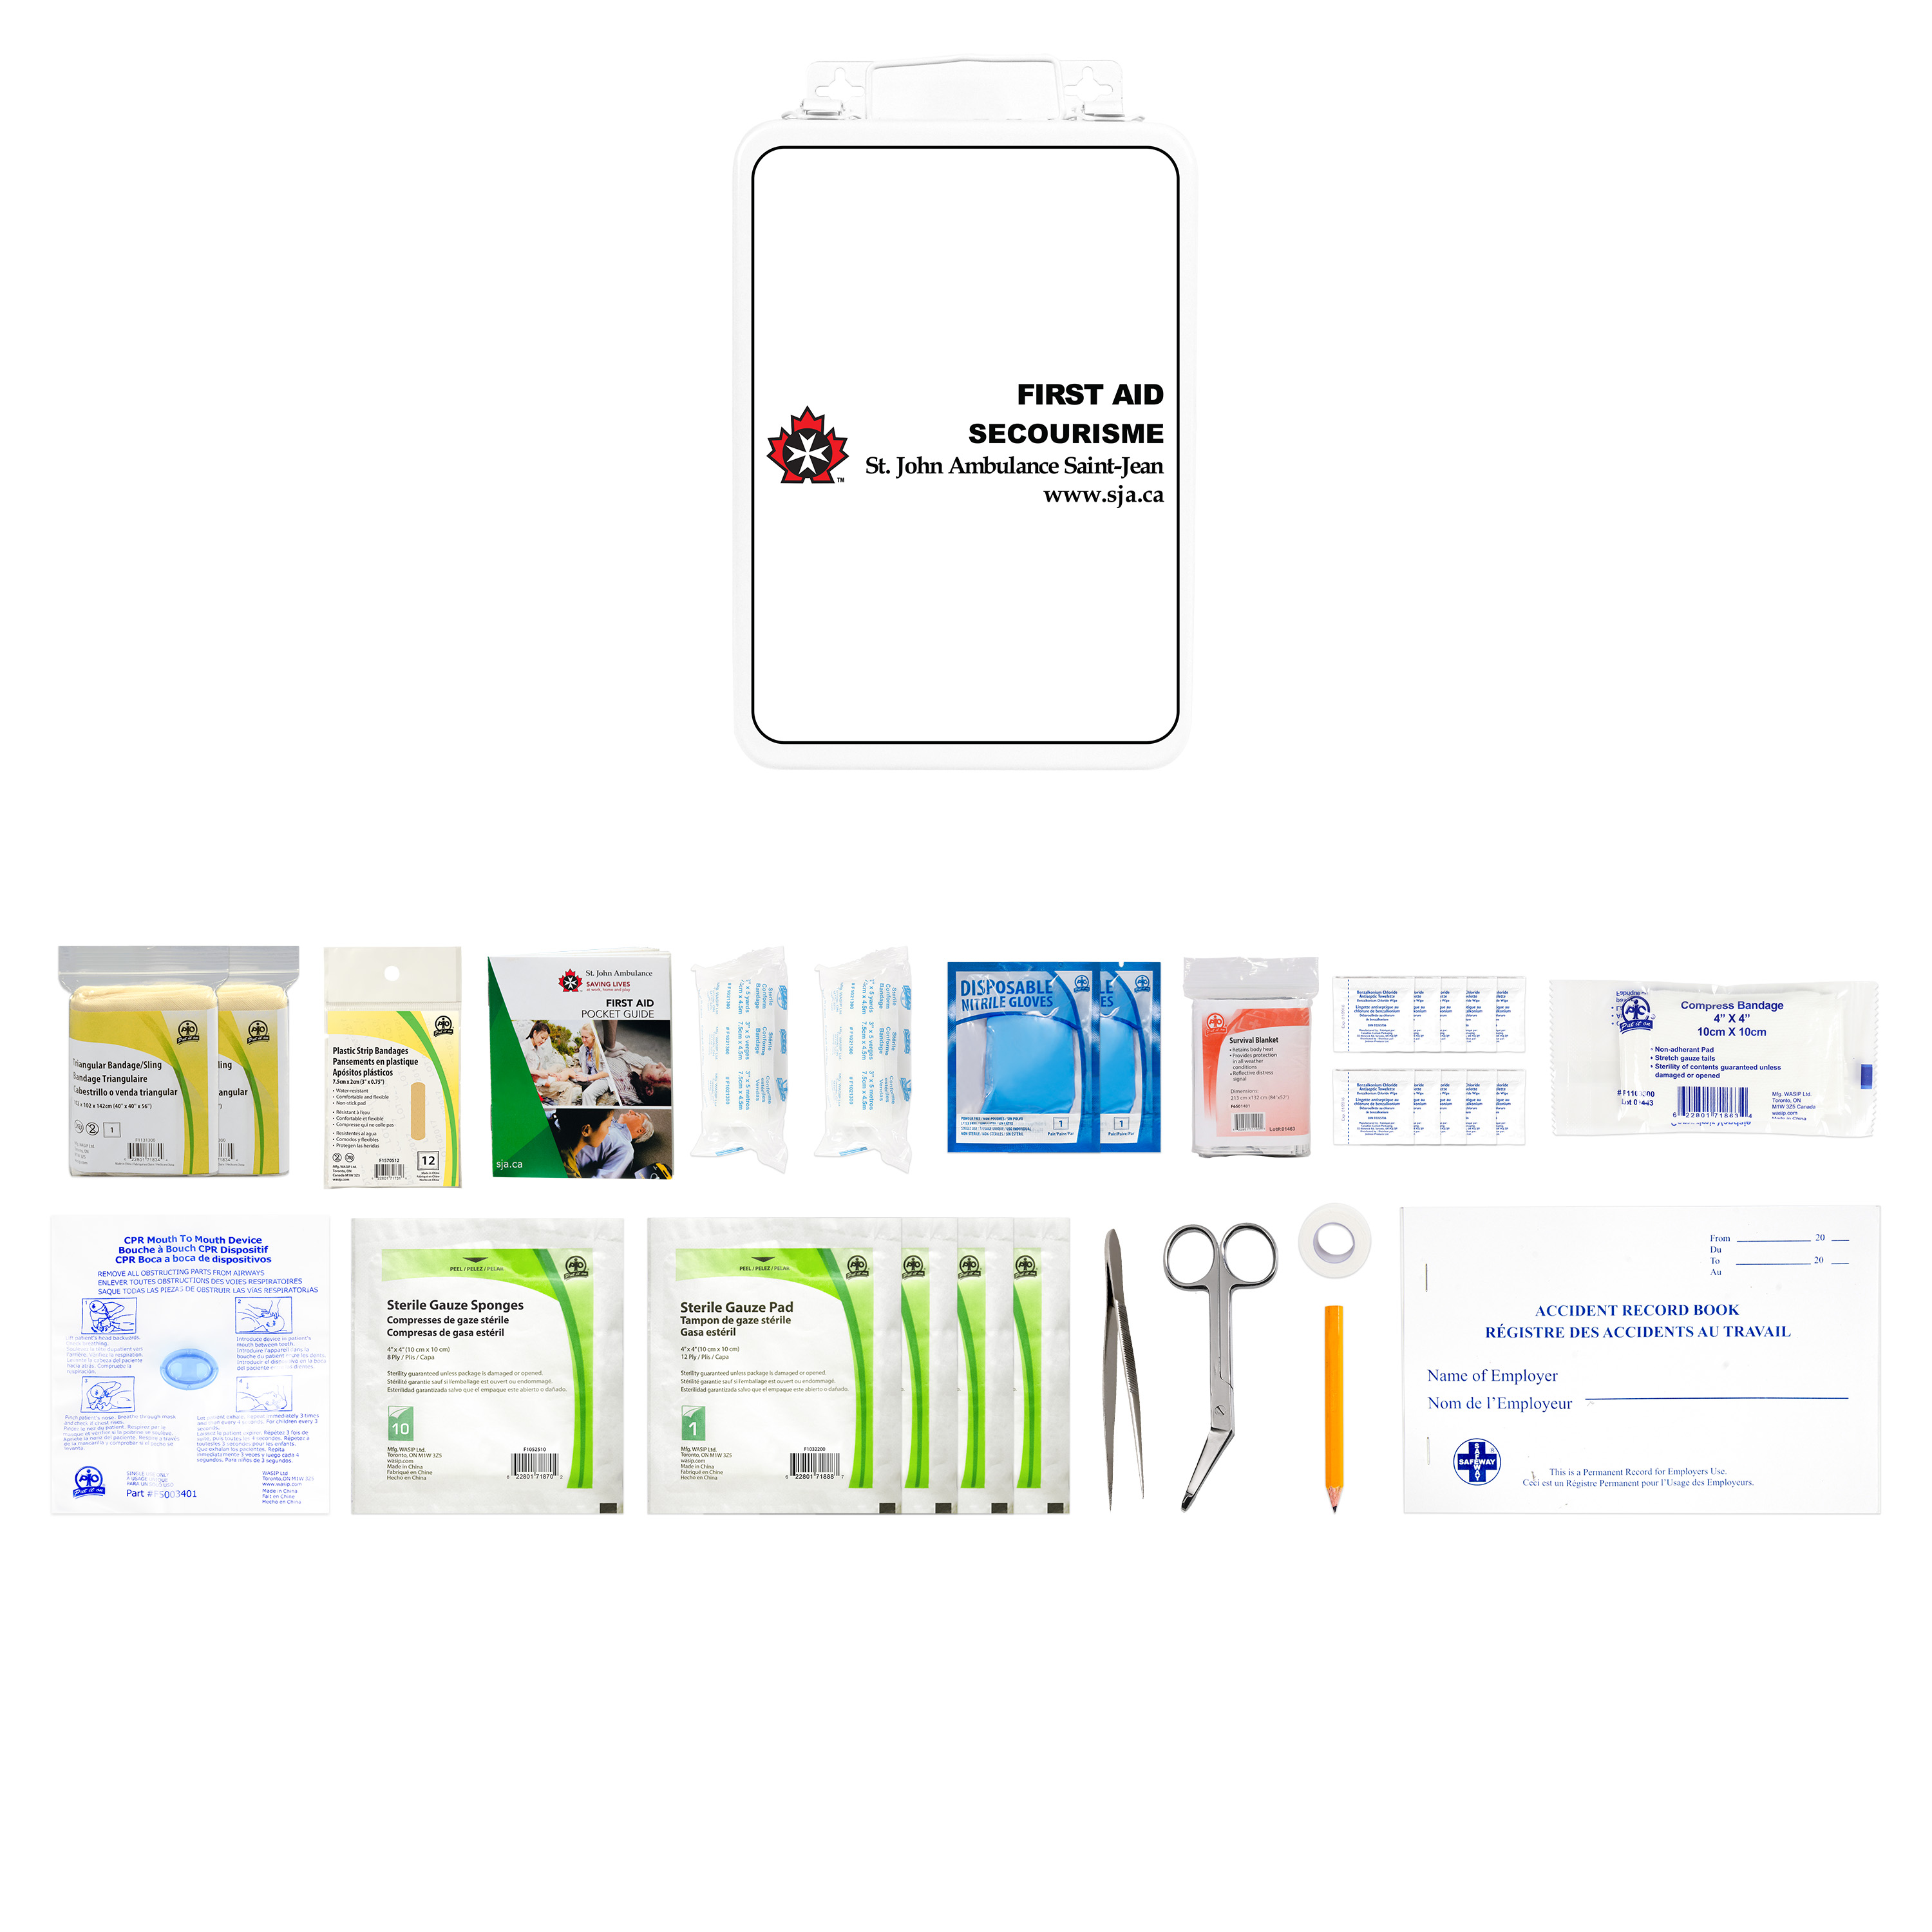 Canada Labour Code, Level A, Metal First Aid Kit